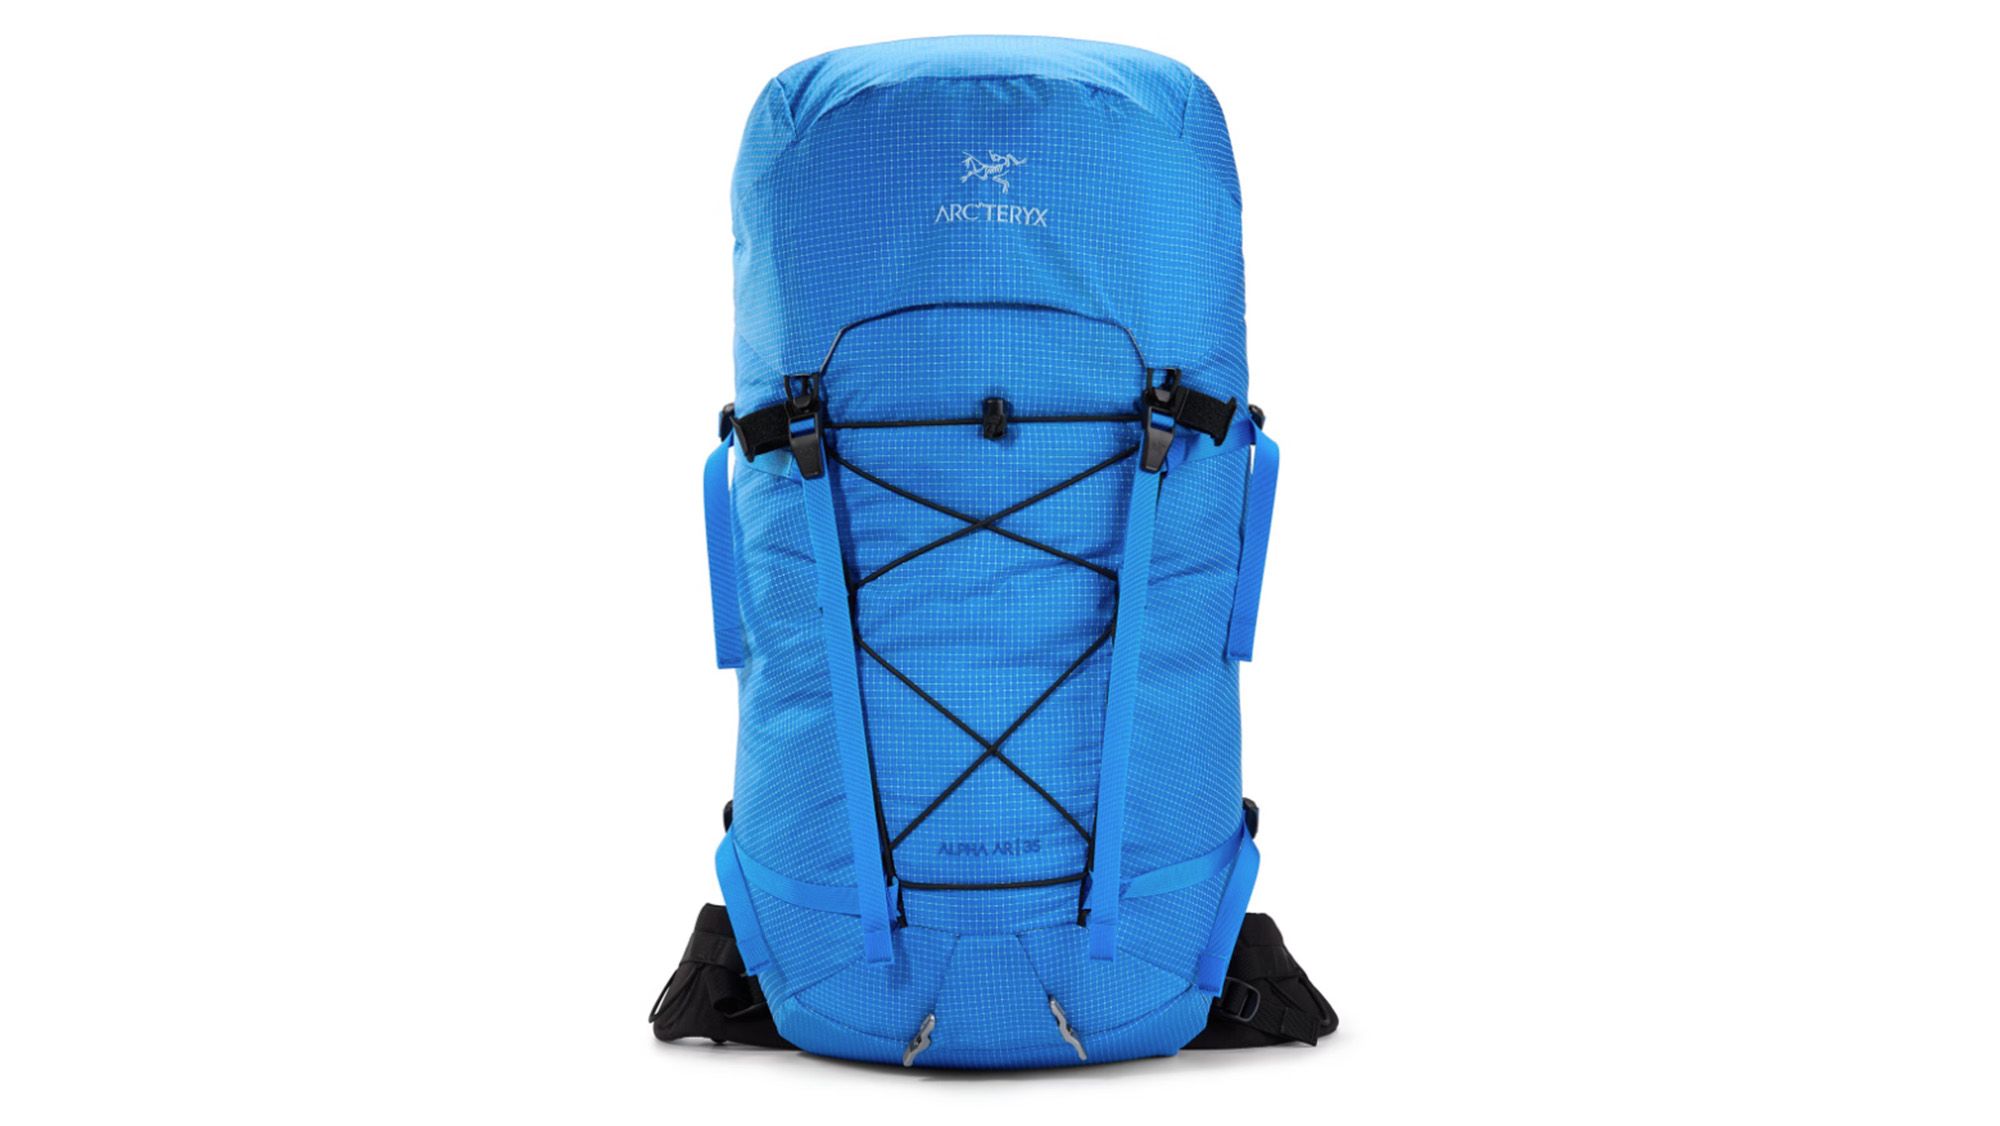 The most reliable winter hiking gear in according to experts | Underscored